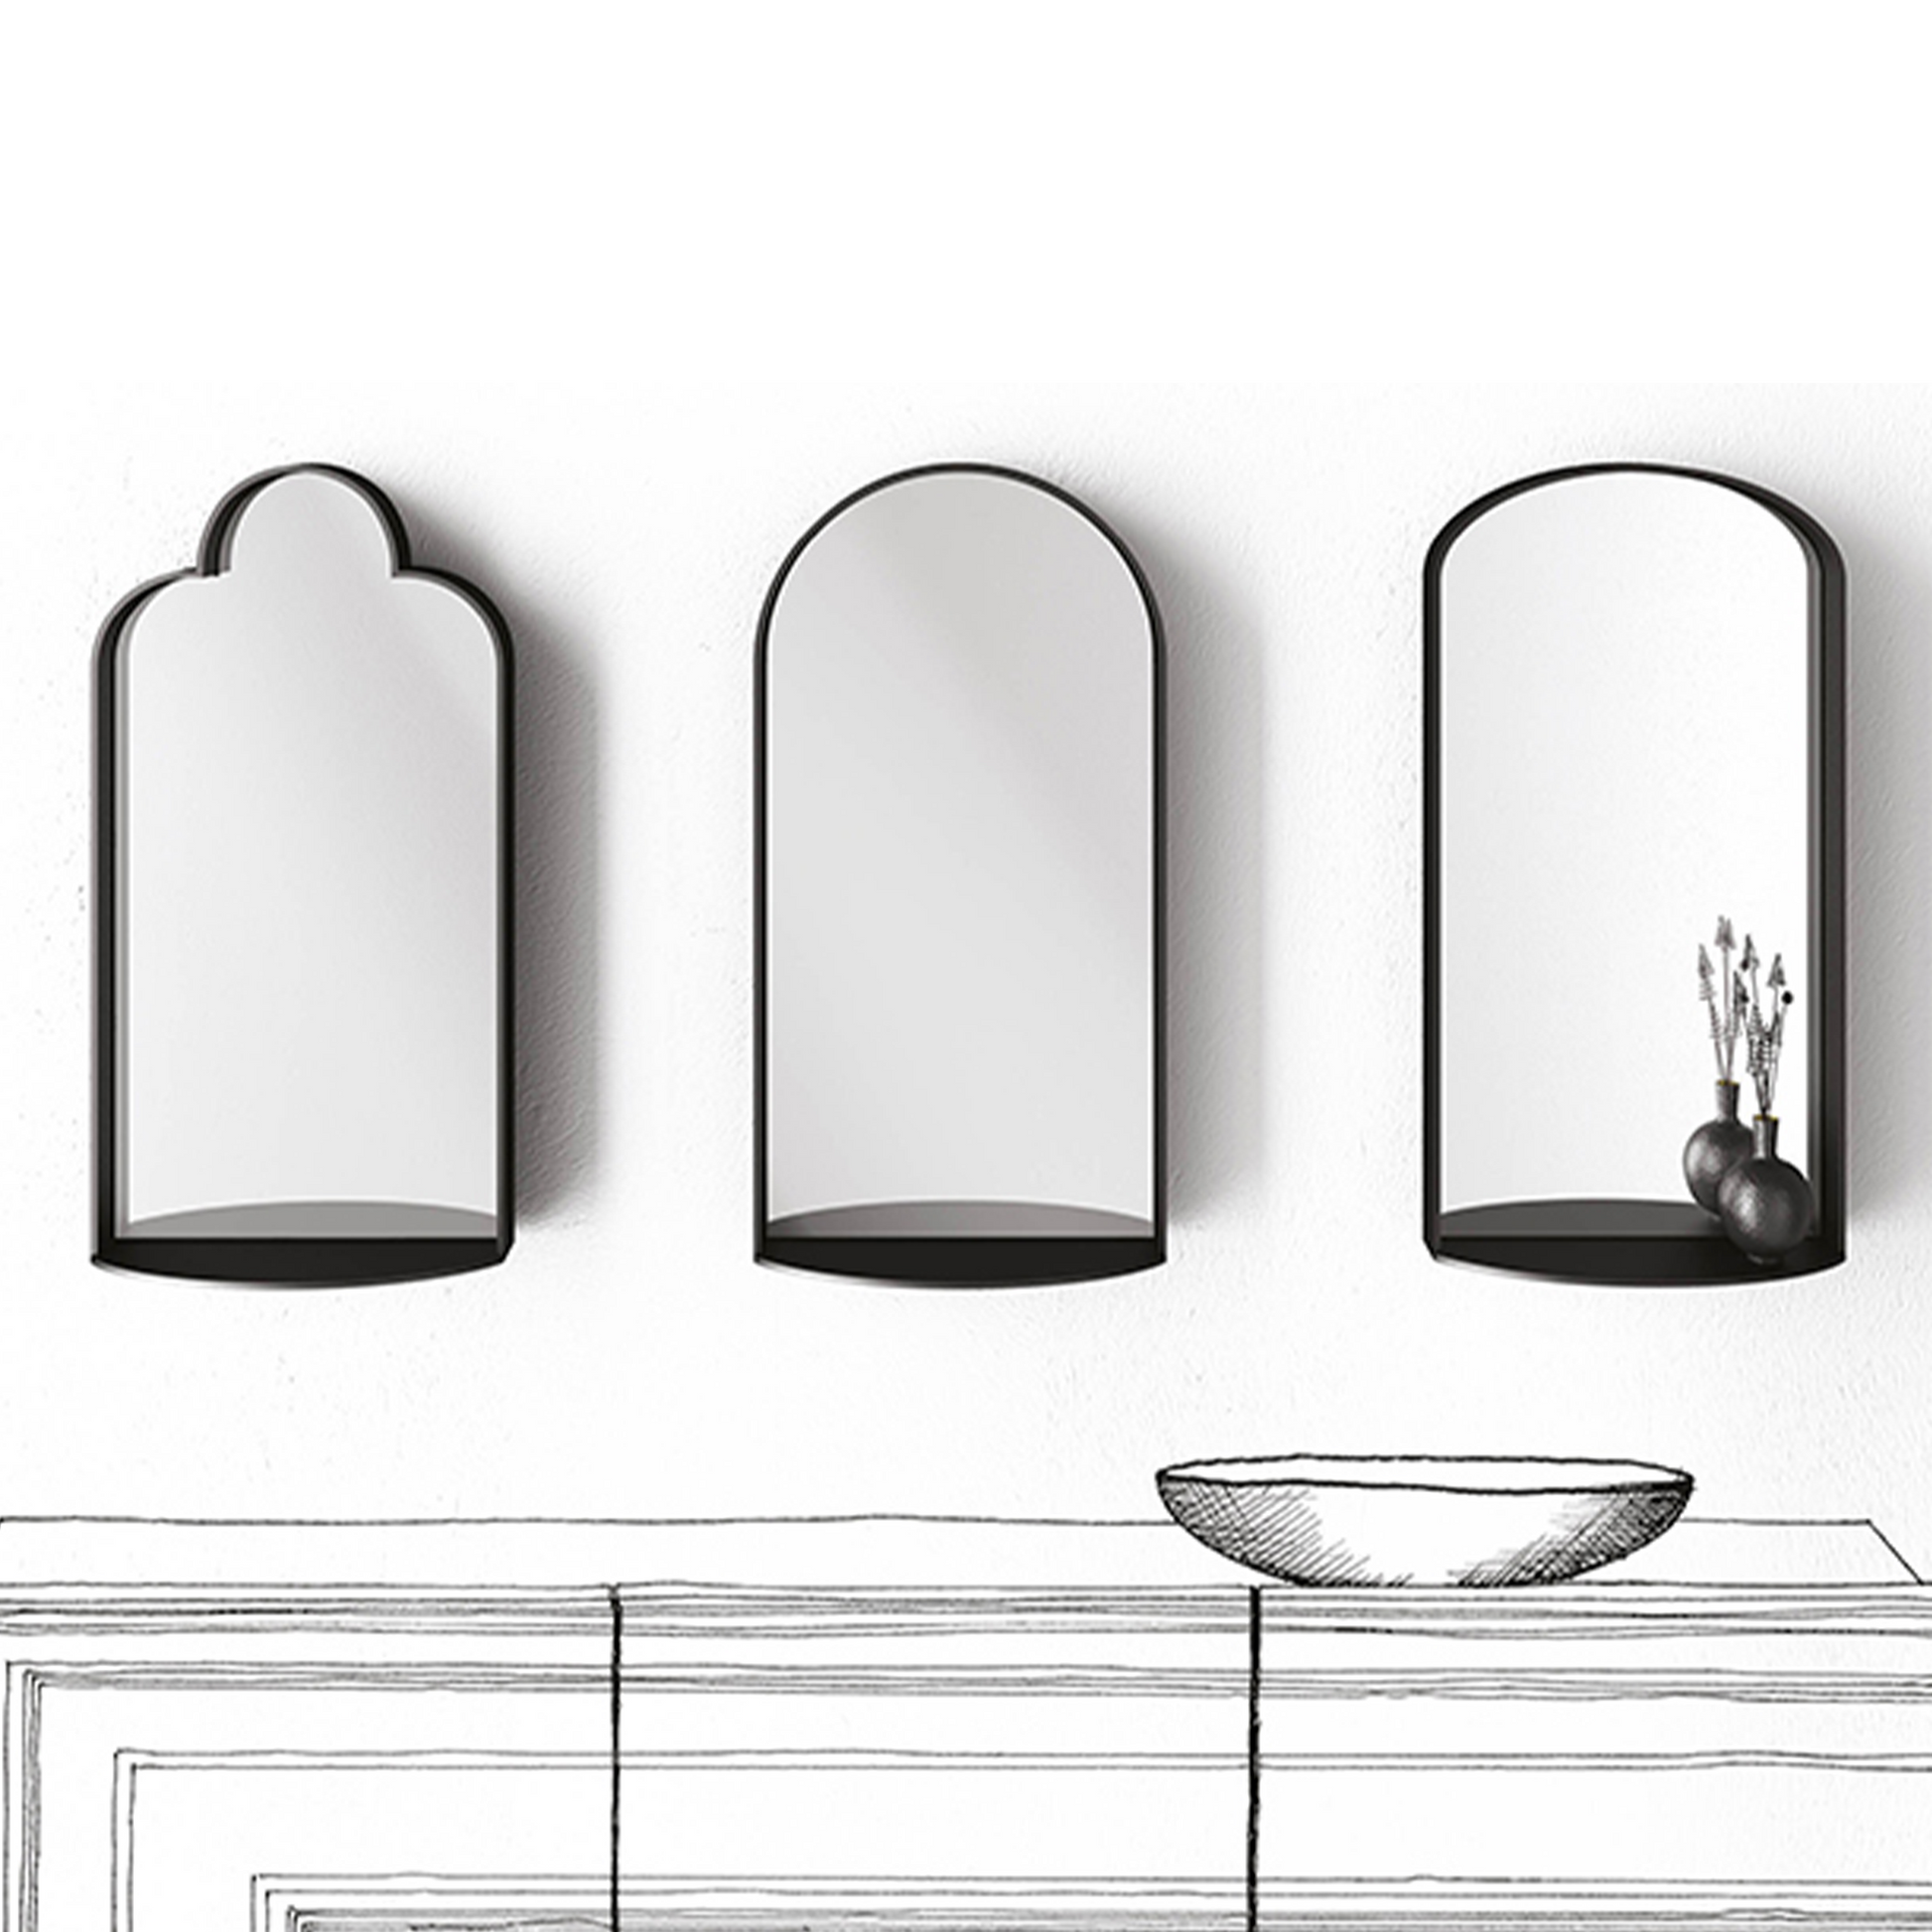 Mirrors hanging above an entryway console, resembling different shaped windows.